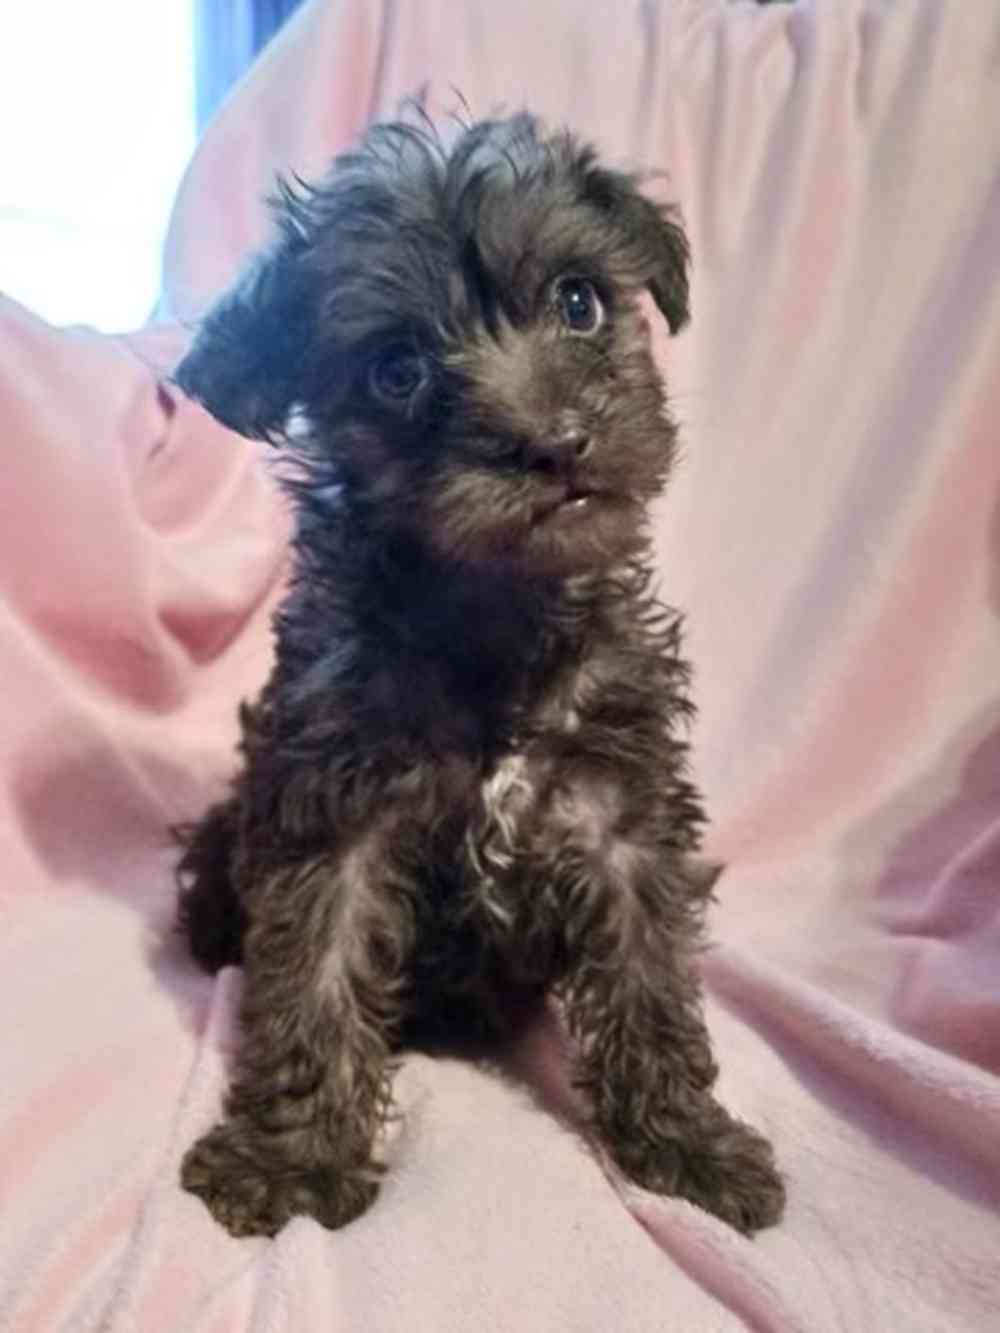 19666176a71ade1-1312-4ab8-8bb2-caa76d26747dschnoodle3.jpeg